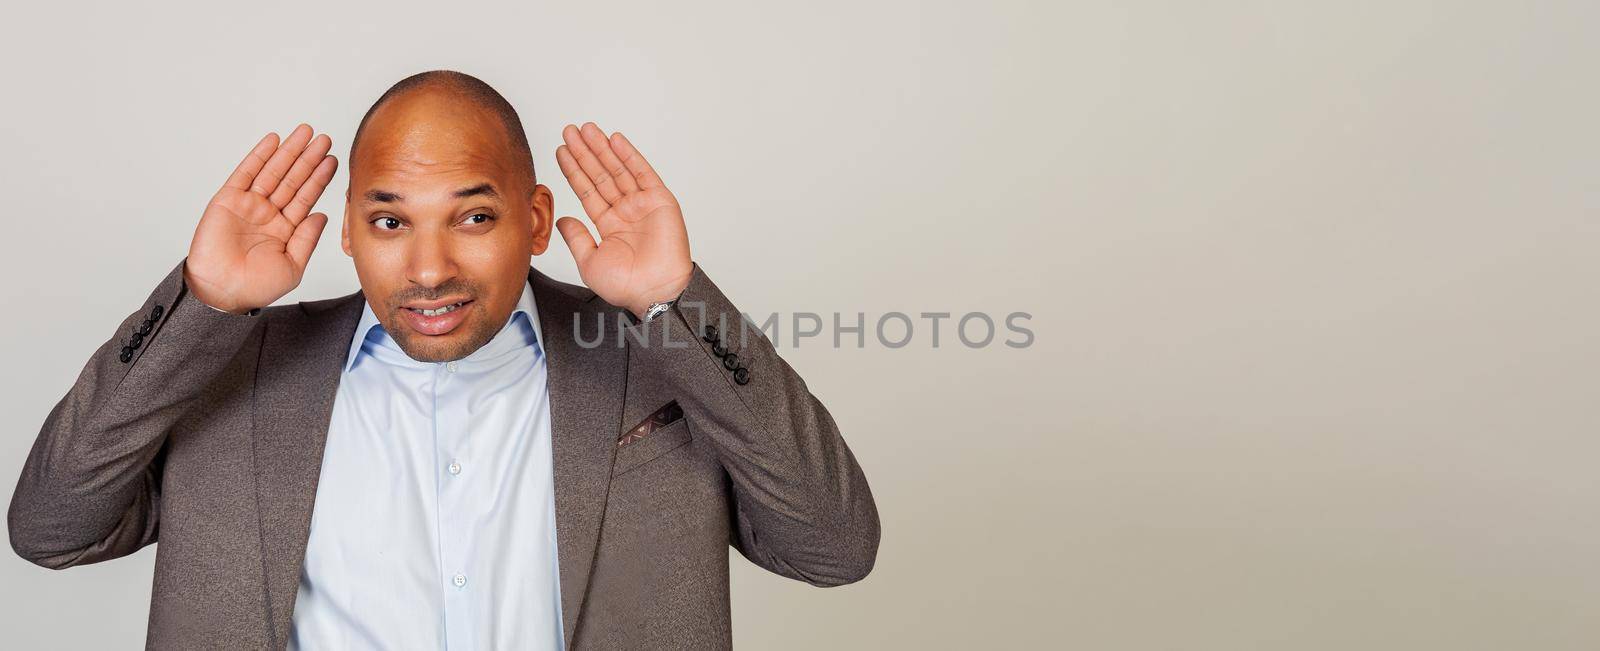 Man African American businessman, holding his hand behind his ear, showing that he does not hear, trying to listen to gossip, listen carefully to someone else's conversation.